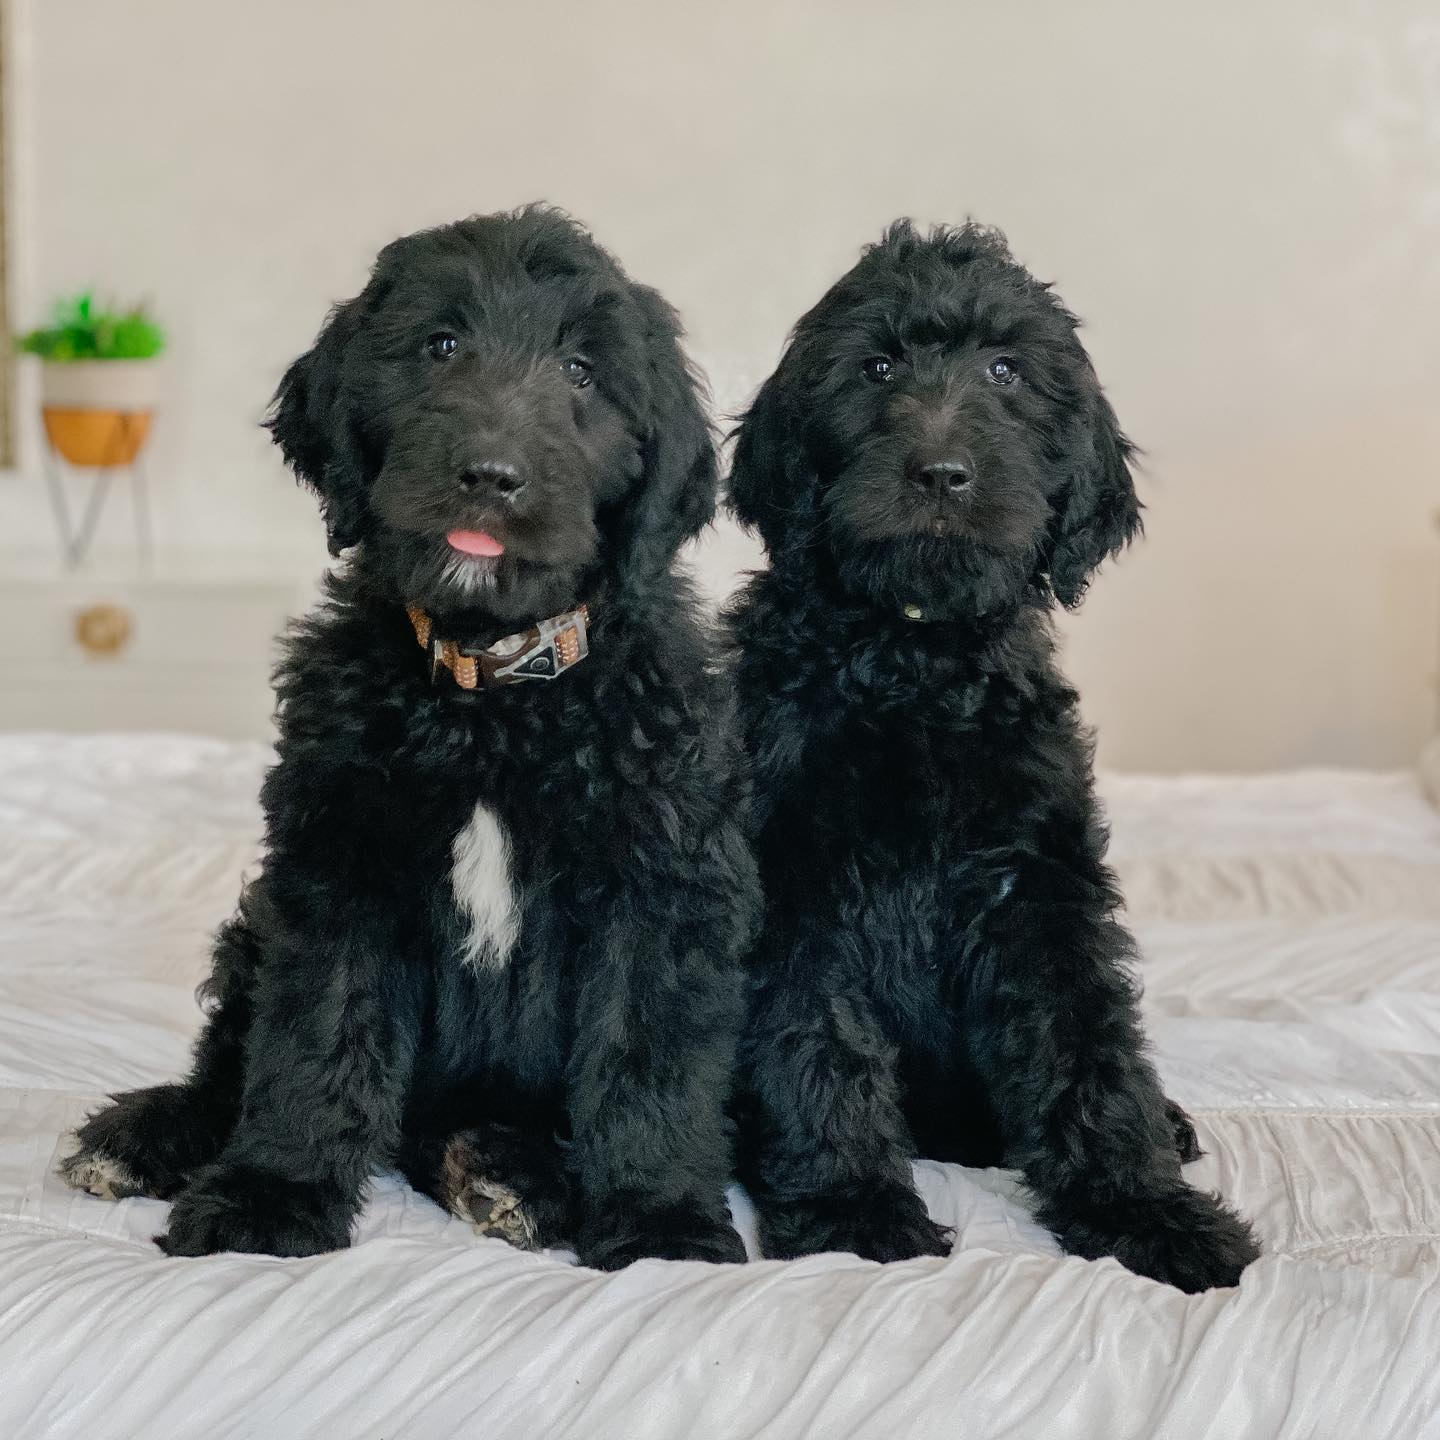 Two black golden doodle puppies sitting side-by-side on a bed. They are allergy friendly and family friendly.